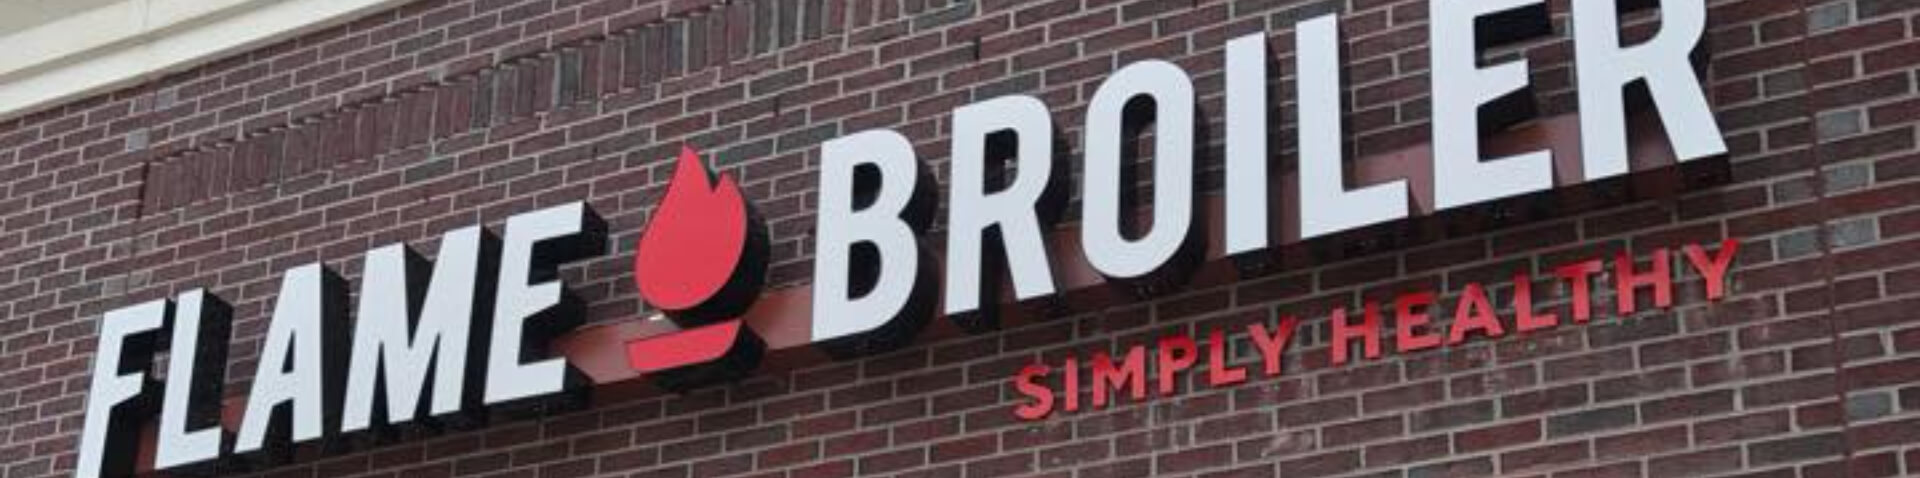 Flame Broiler sign